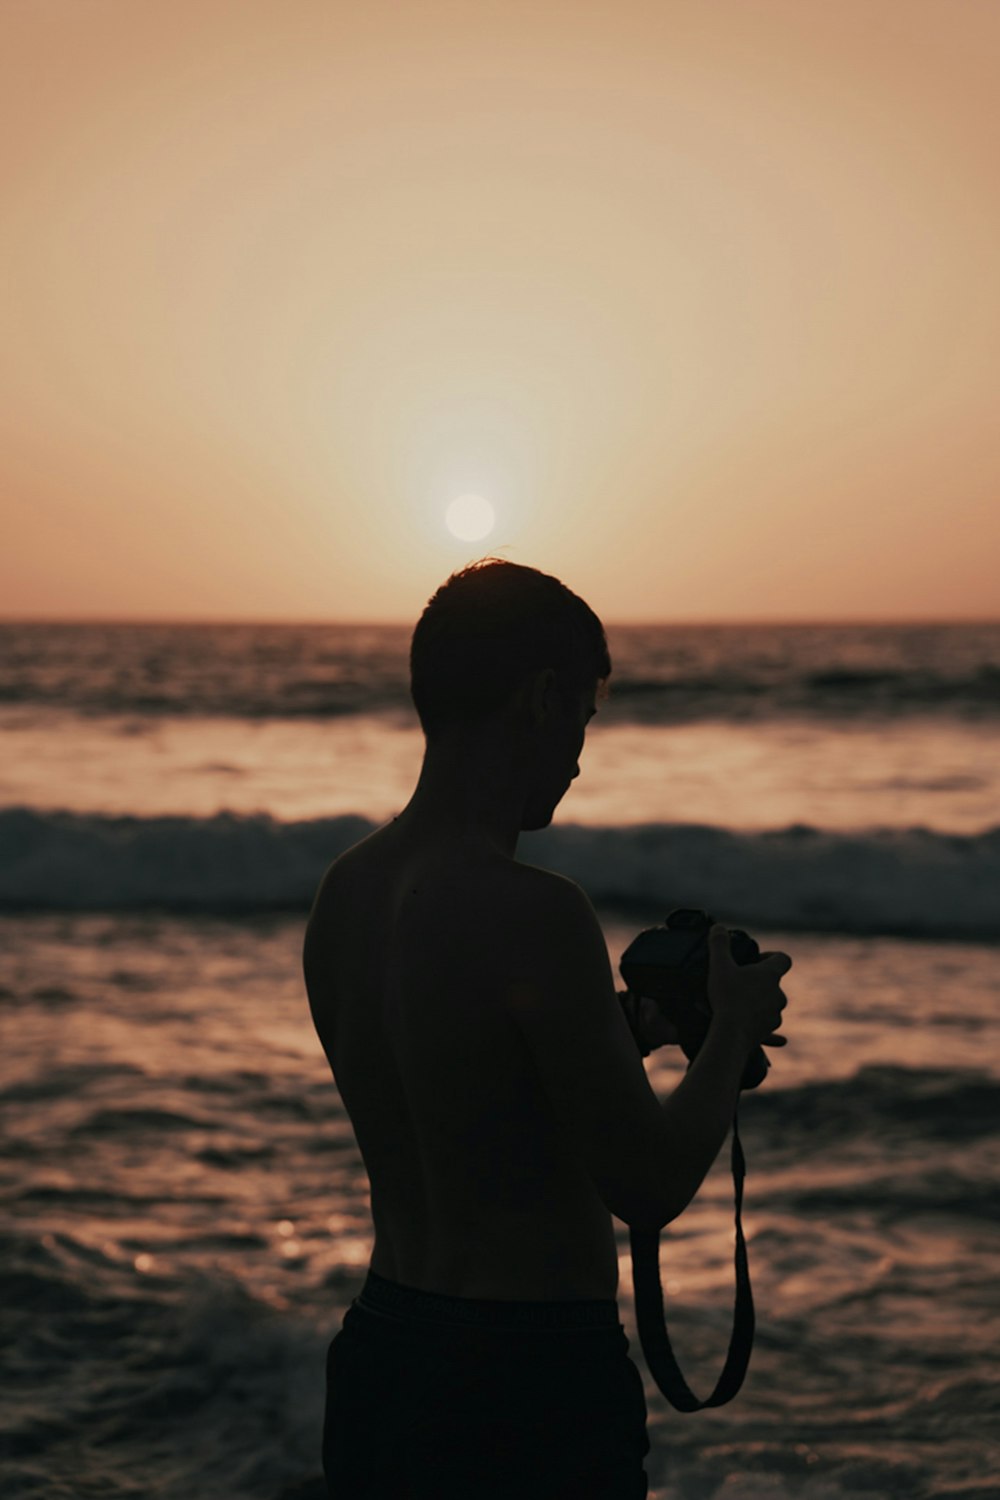 silhouette of man holding camera near body of water during sunset